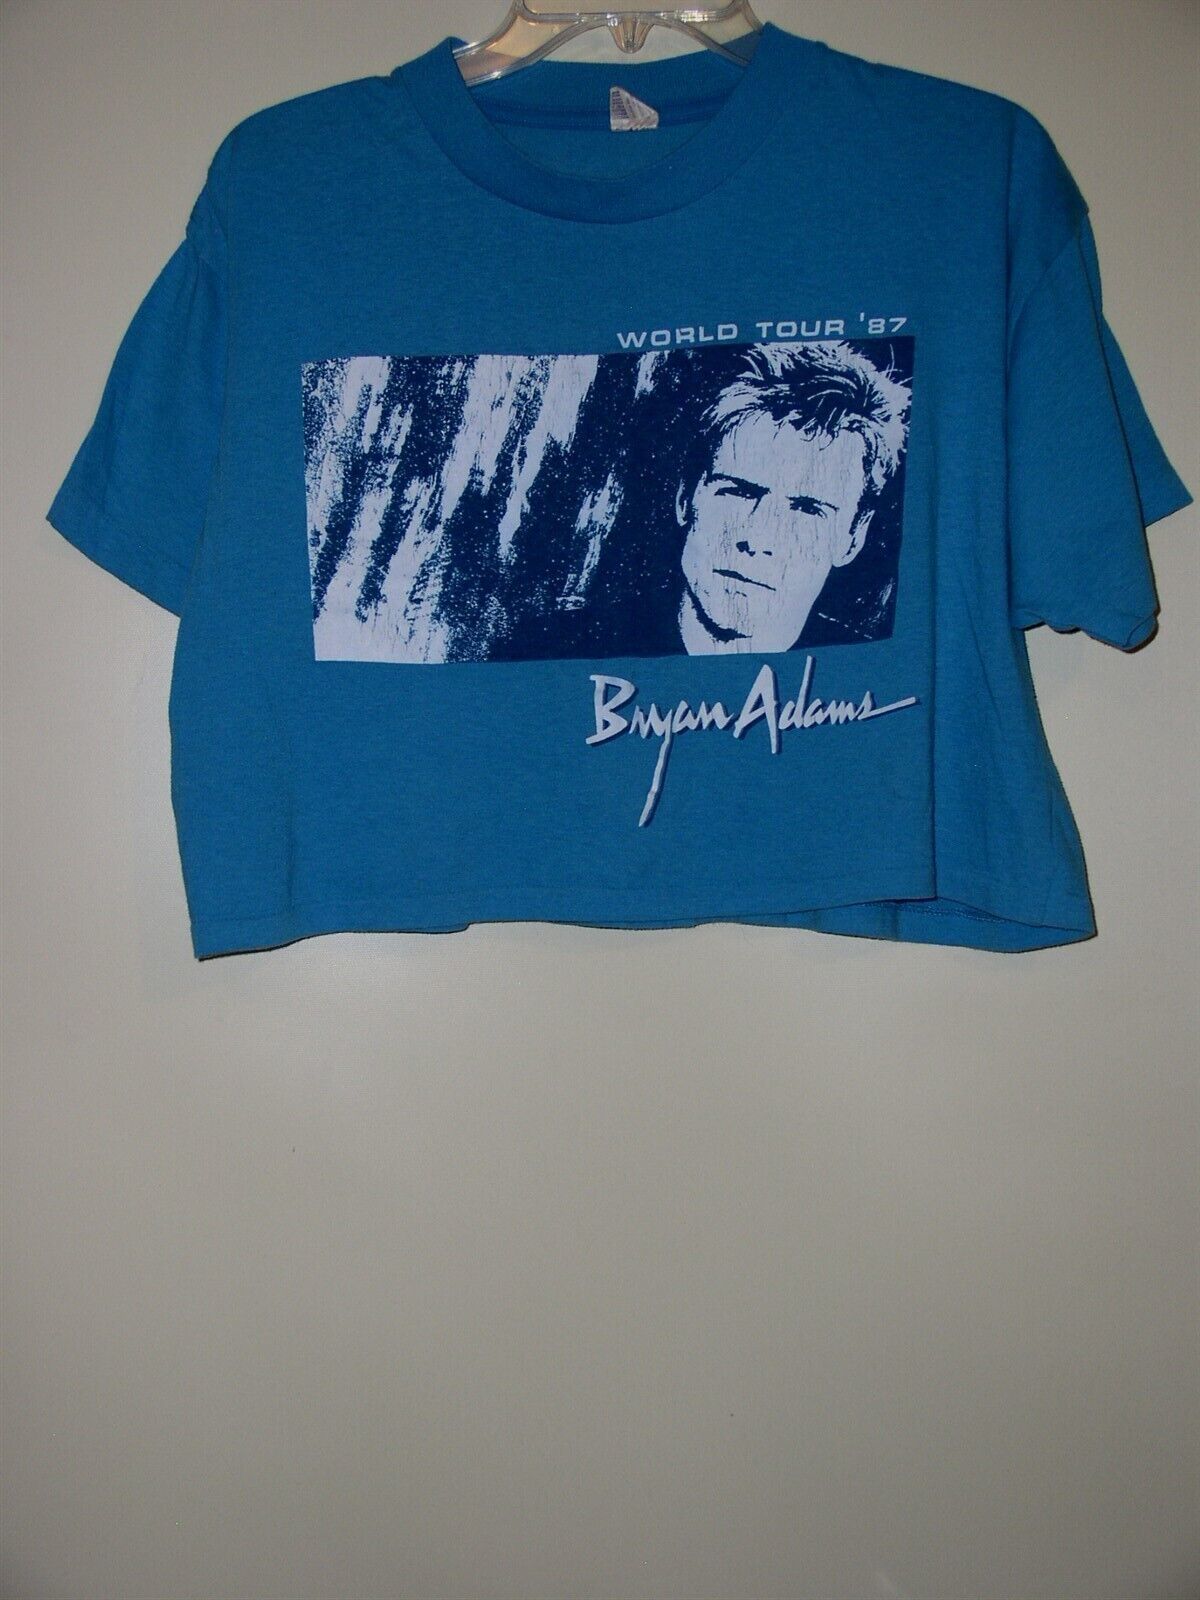 Primary image for Brian Adams Concert Tour Belly Shirt Vintage 1987 Single Stitched Size Large